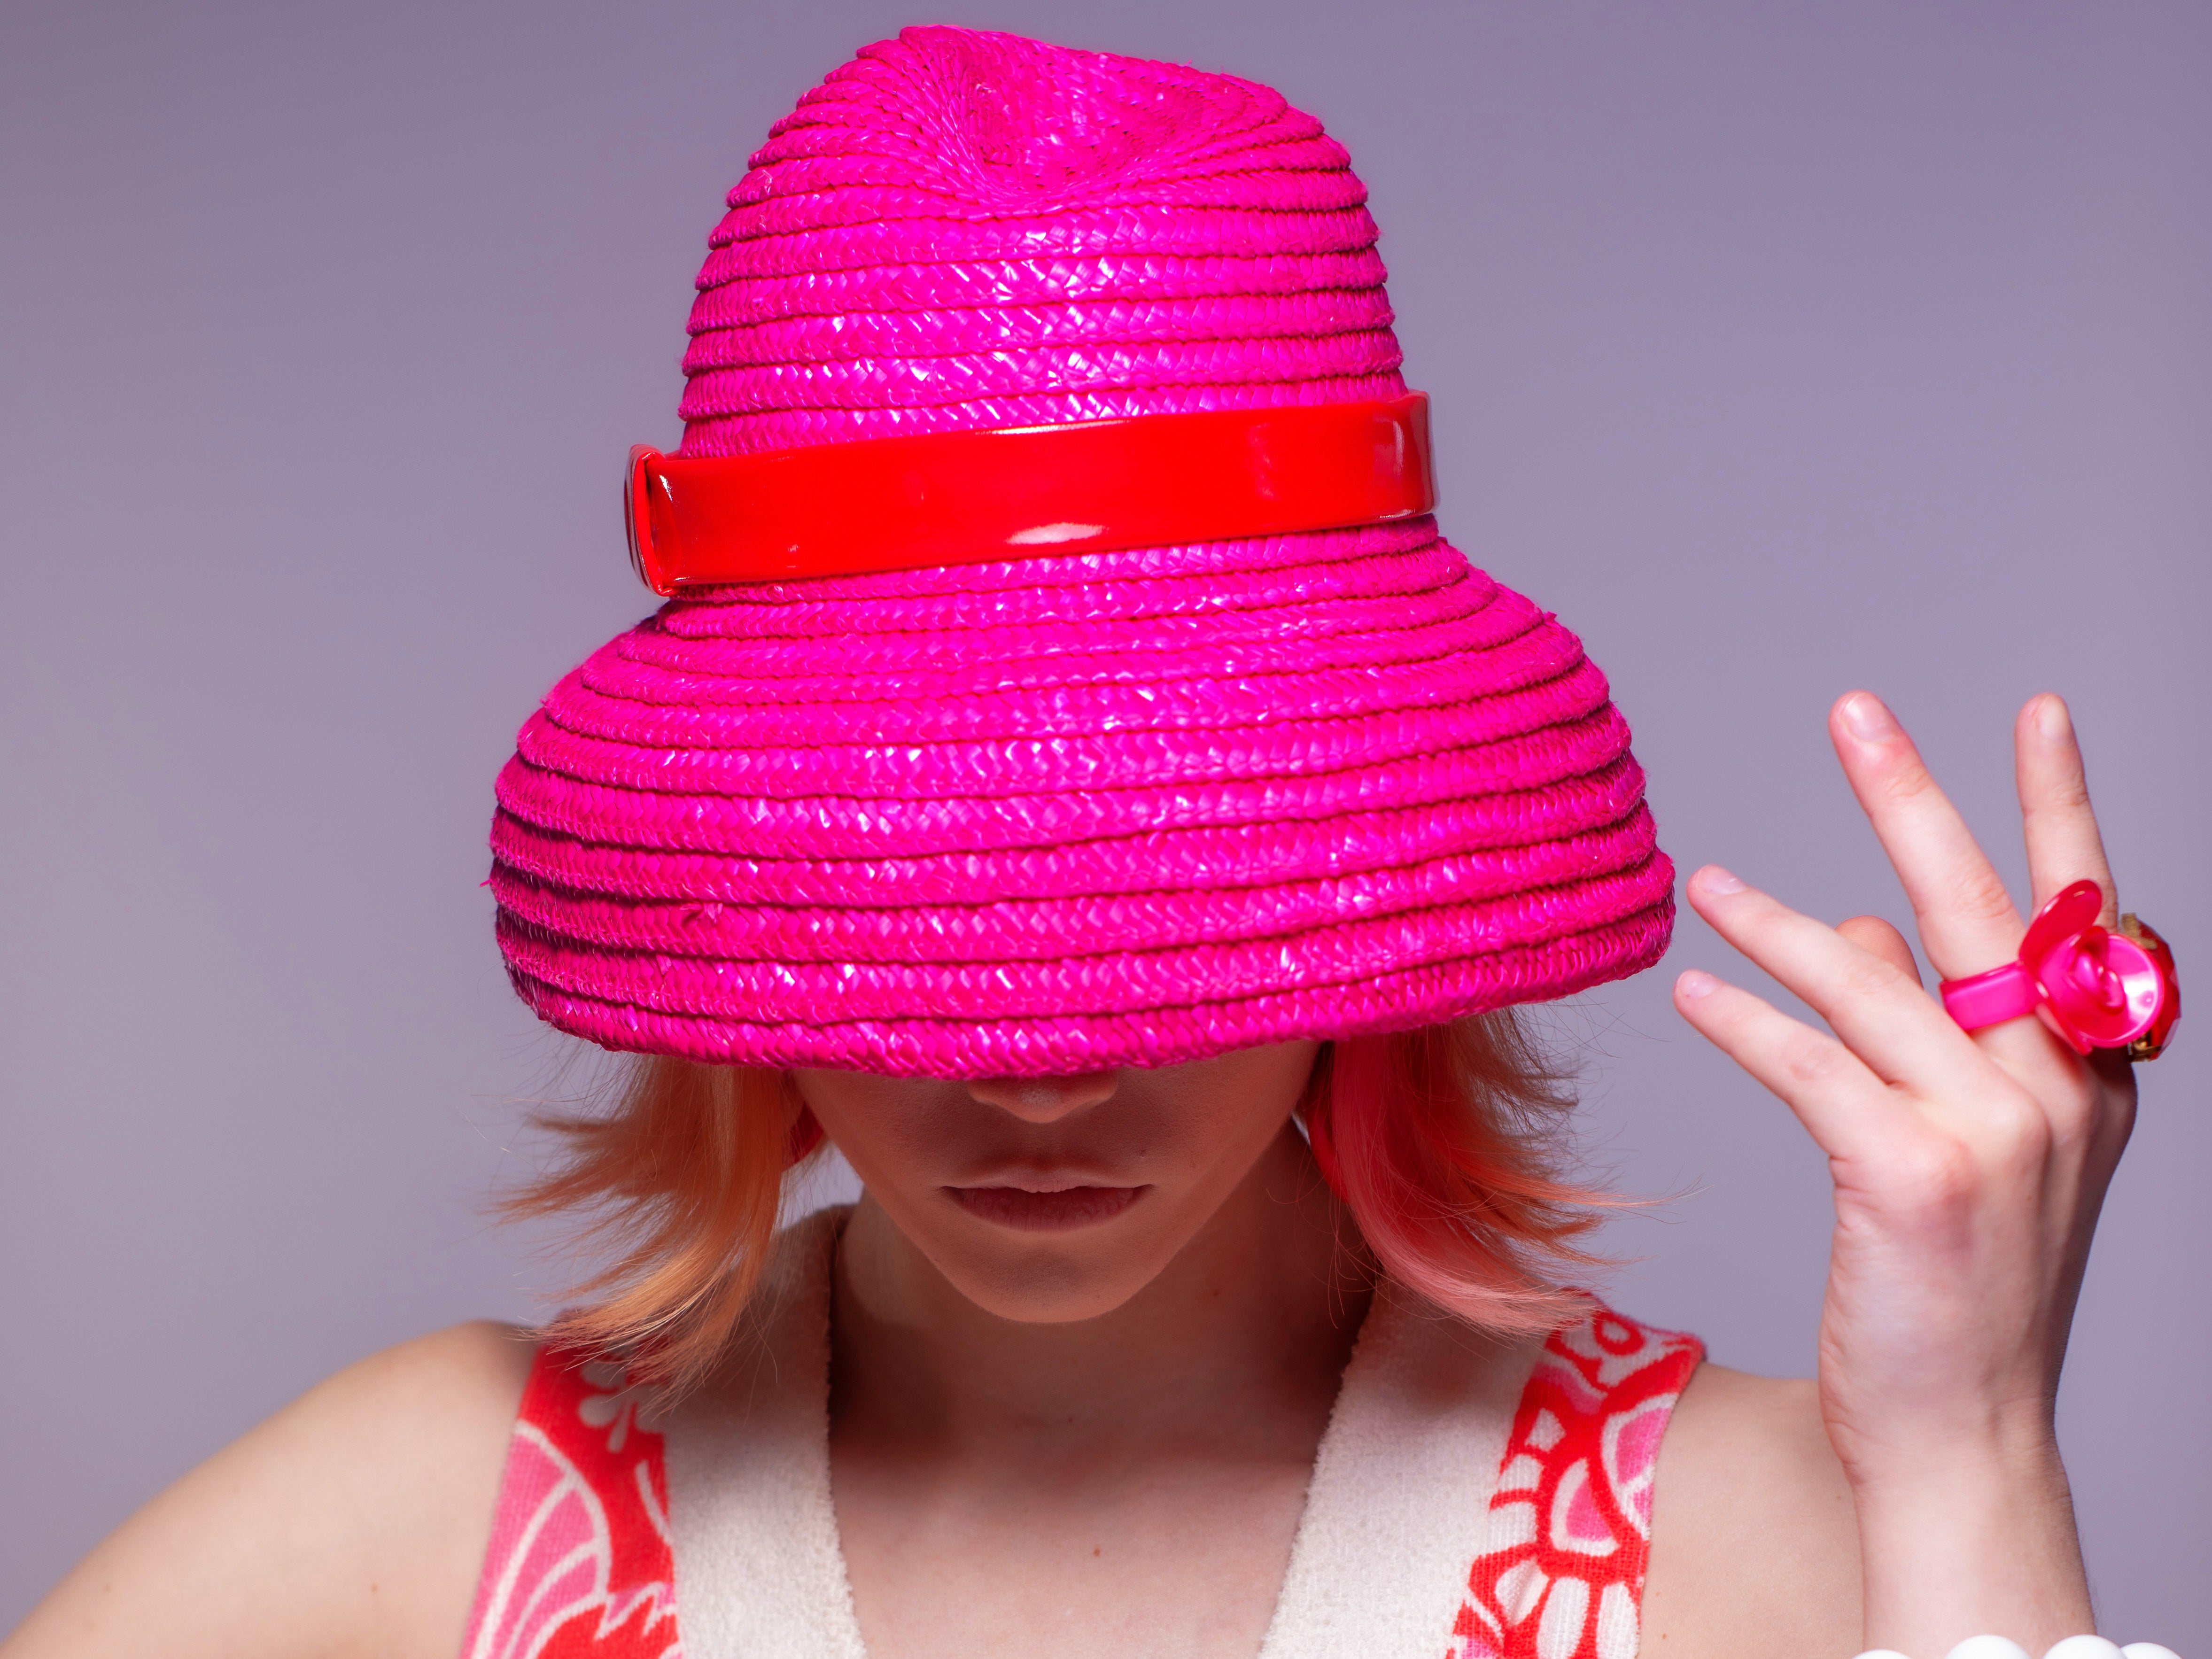 Cerise Straw Cloche Hat with Red PVC Band